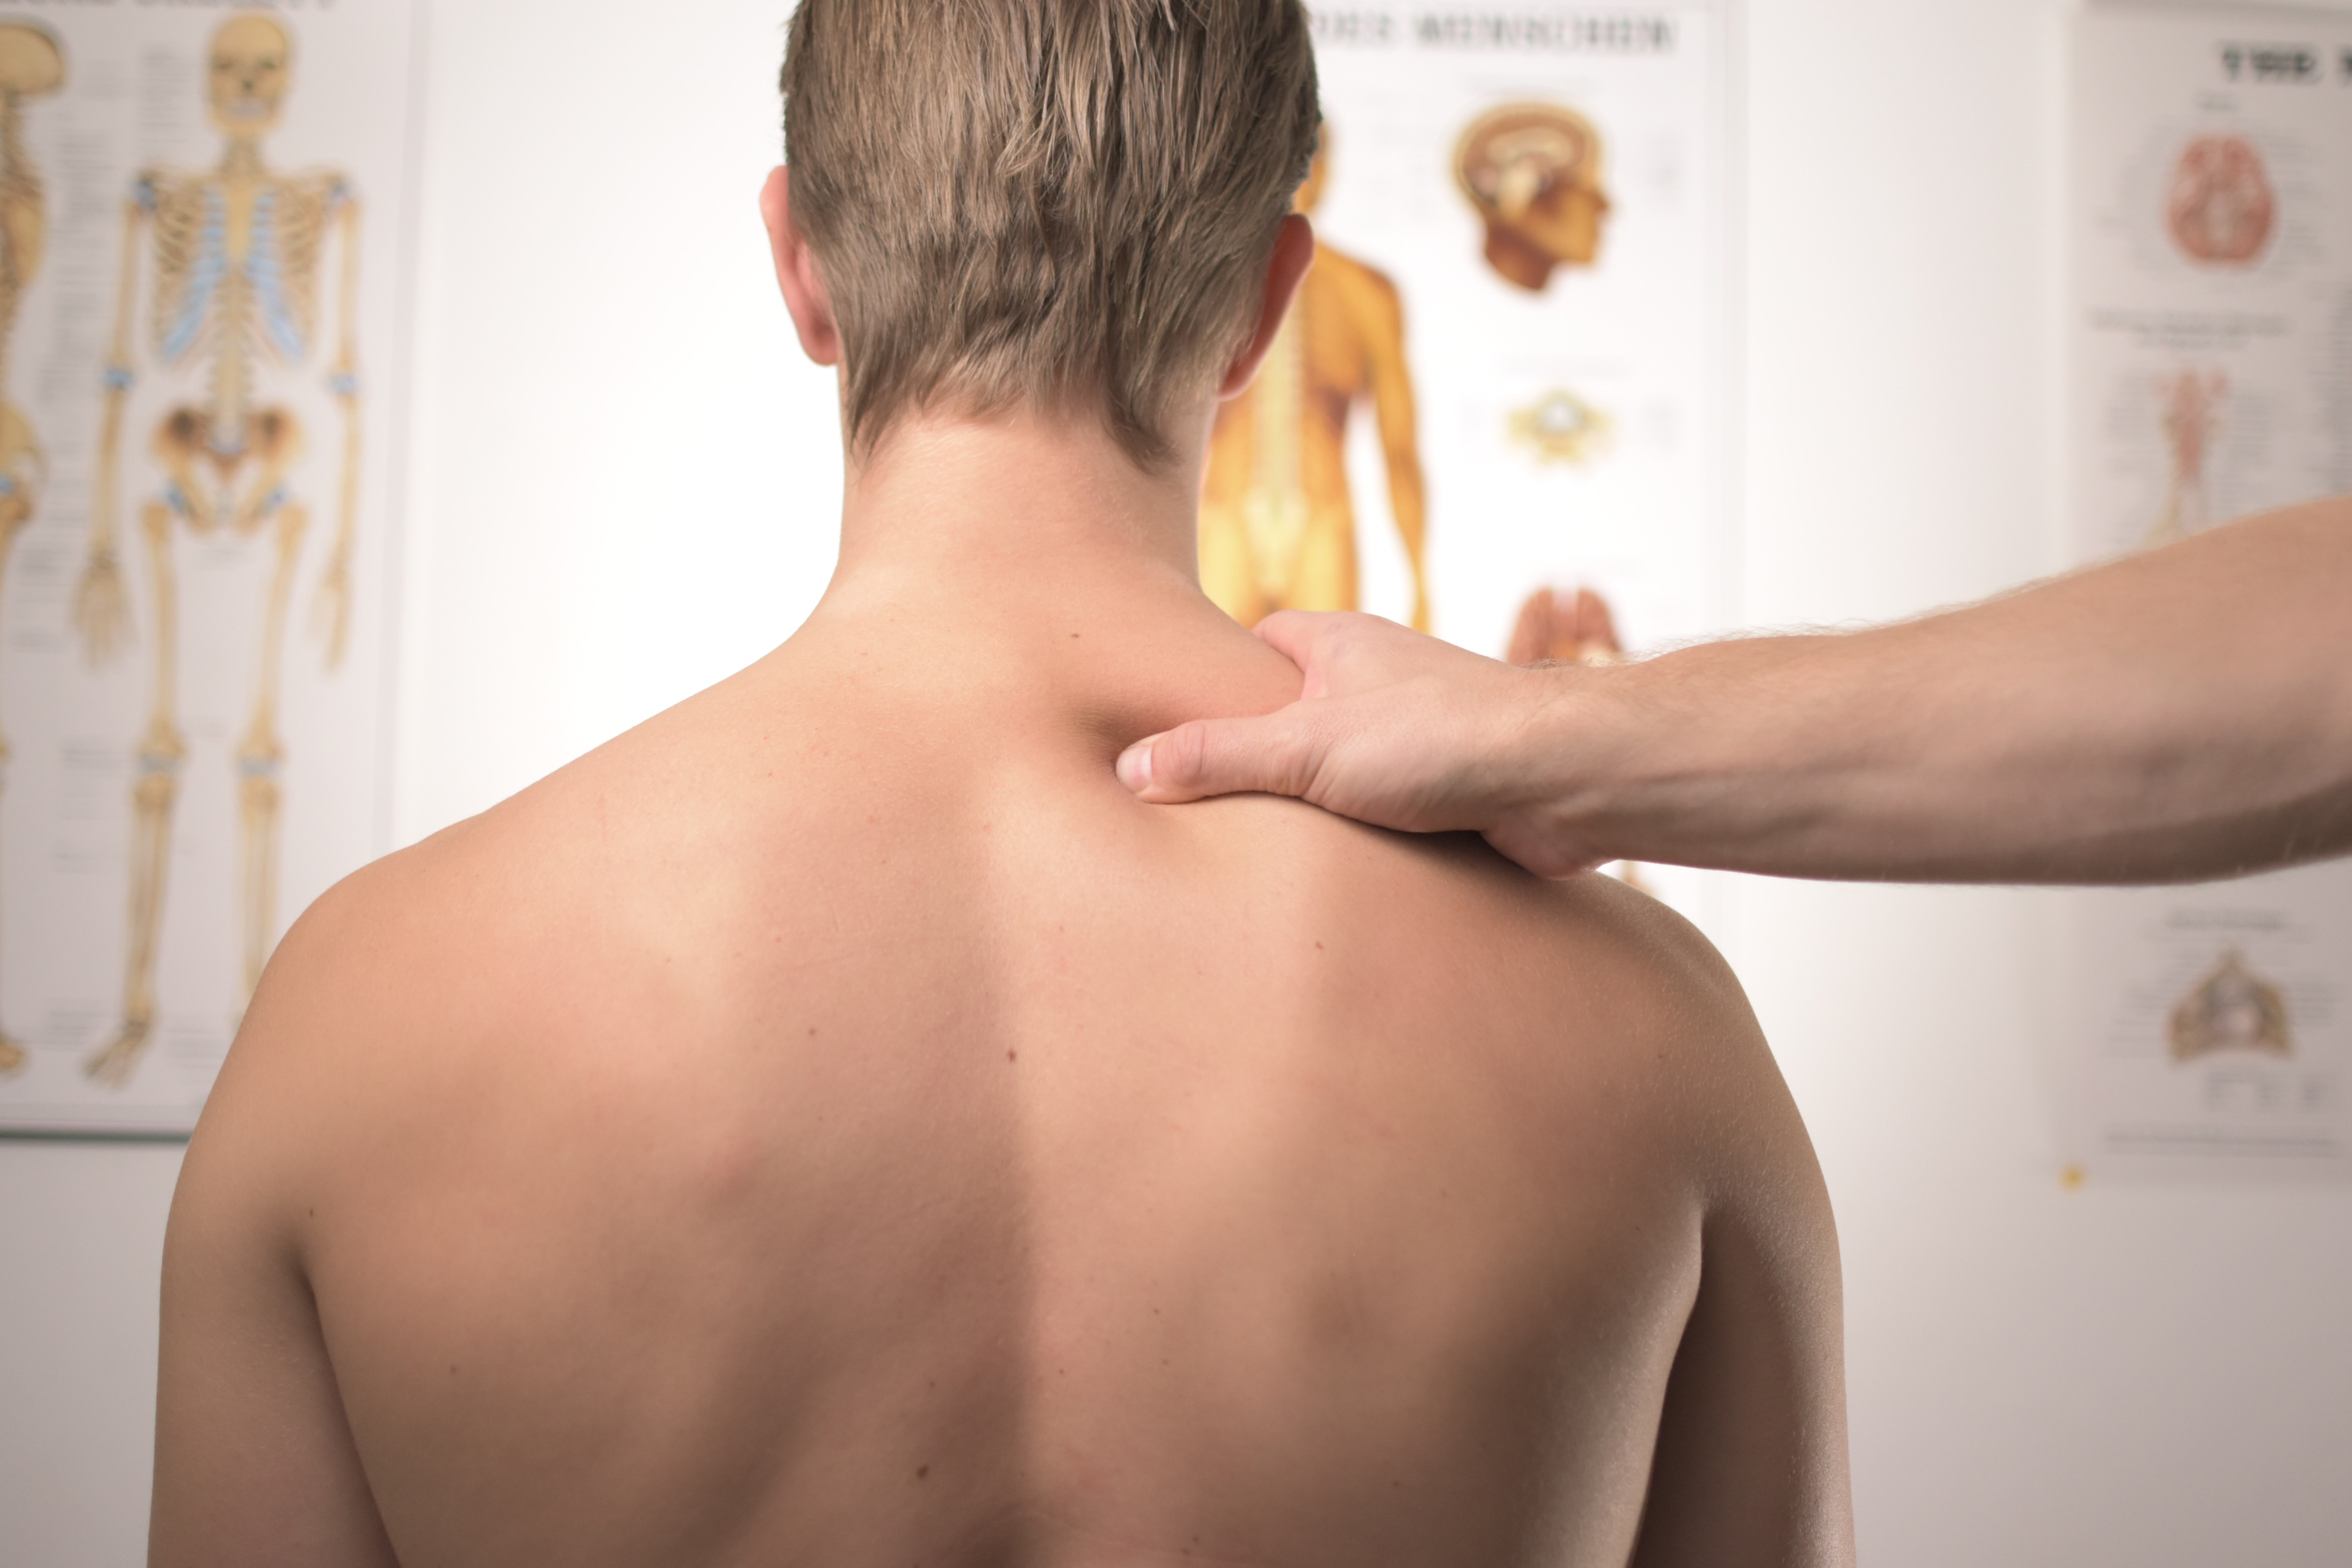 Will My Personal Injury Claim Cover Chiropractic Care?